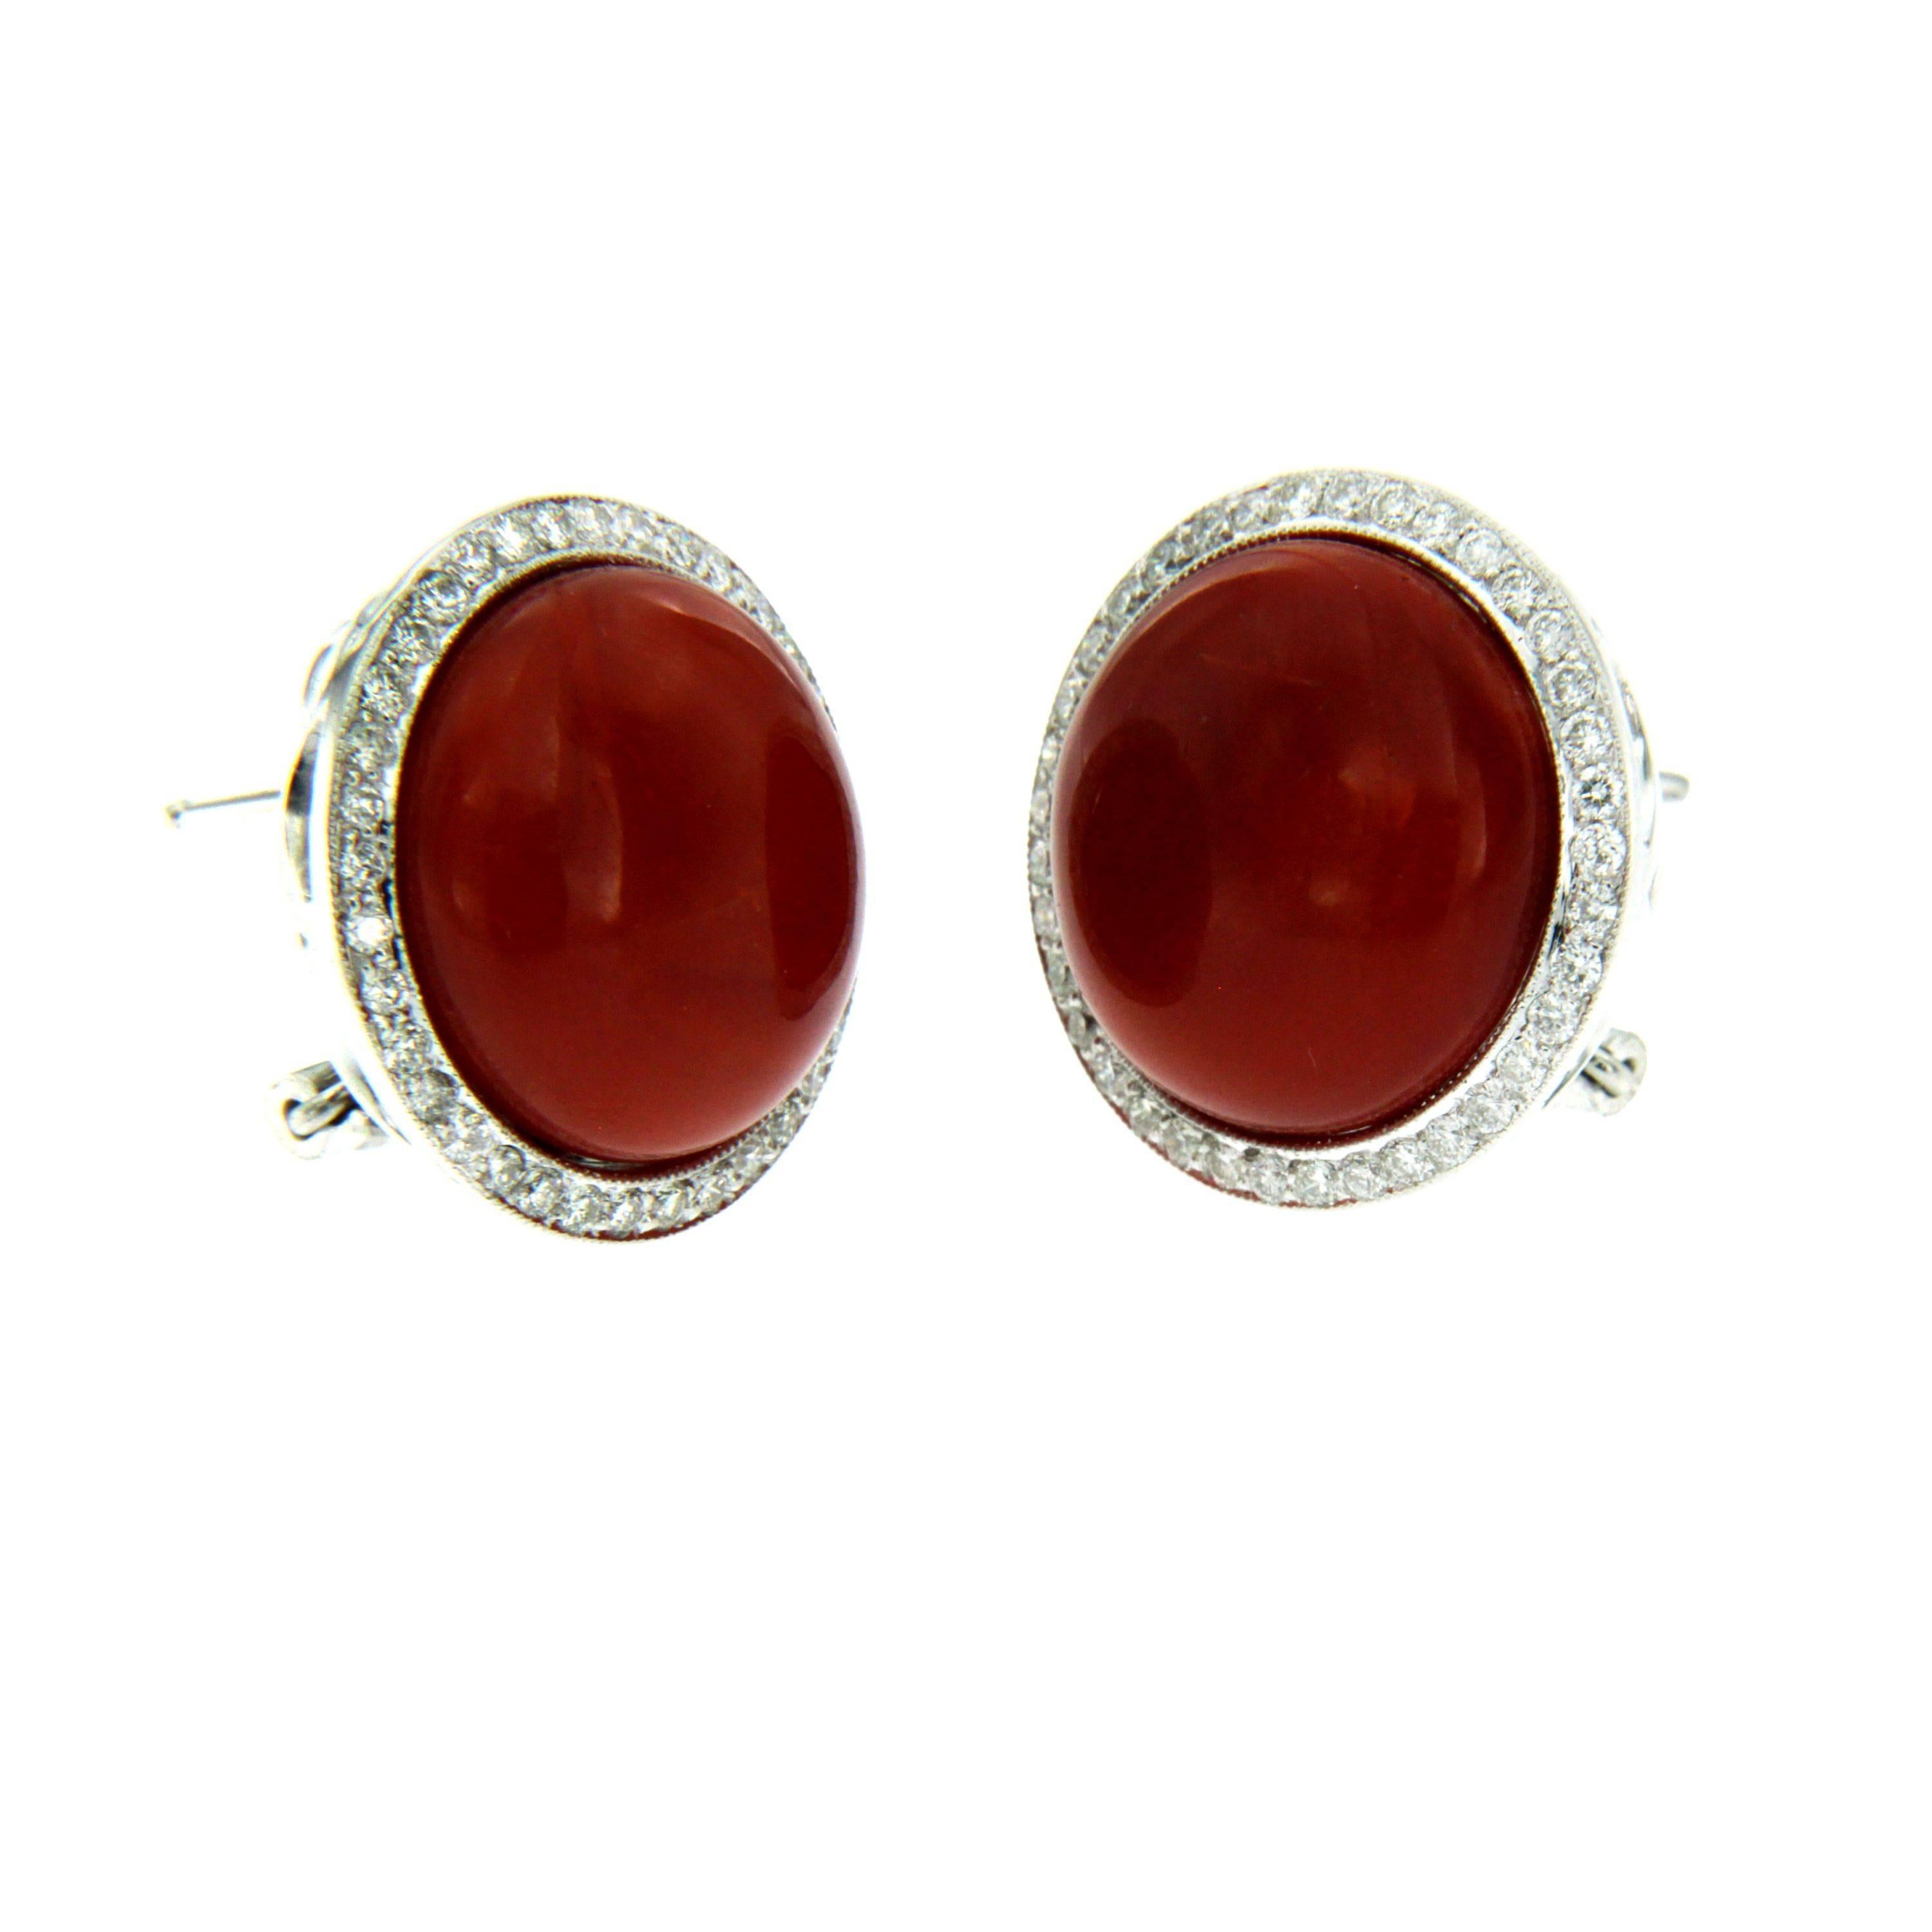 Truly exclusive earrings out from 1990s, hand crafted of solid 18Kt white gold. 
The earrings are set with a Natural Aka Coral (Japanese) of the greatest variety, surrounded by 0.60 total carat of sparkling round brilliant Diamonds graded G color, 